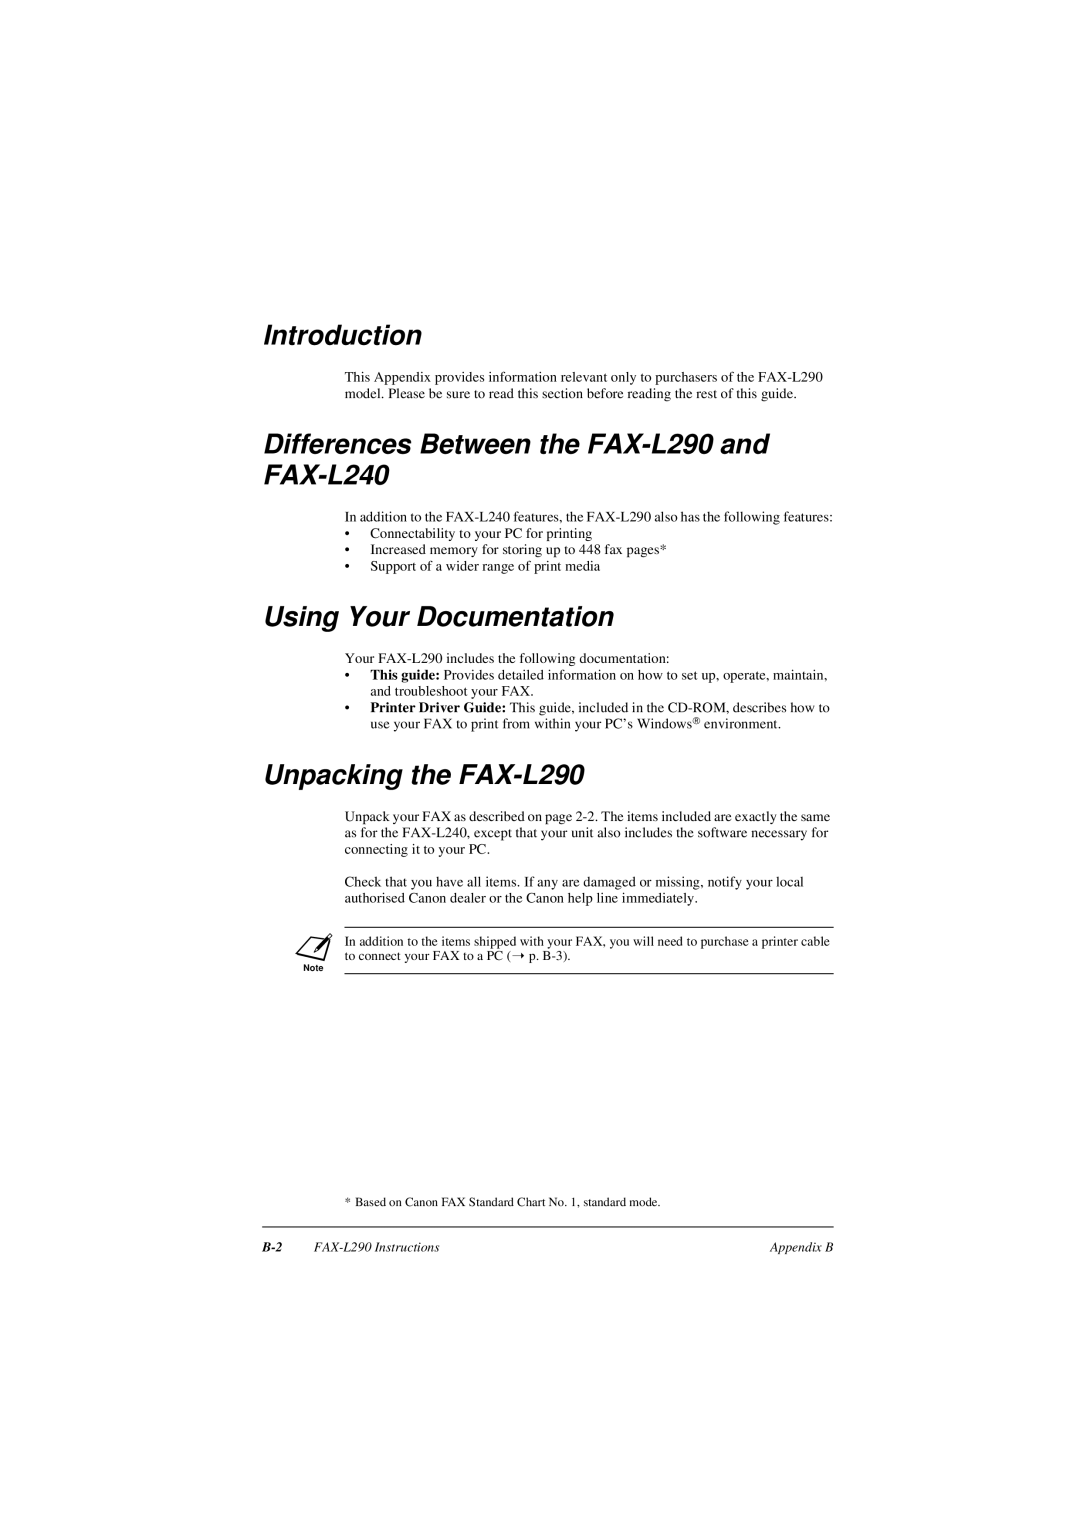 Canon Introduction, Differences Between the FAX-L290 and FAX-L240, Using Your Documentation, Unpacking the FAX-L290 